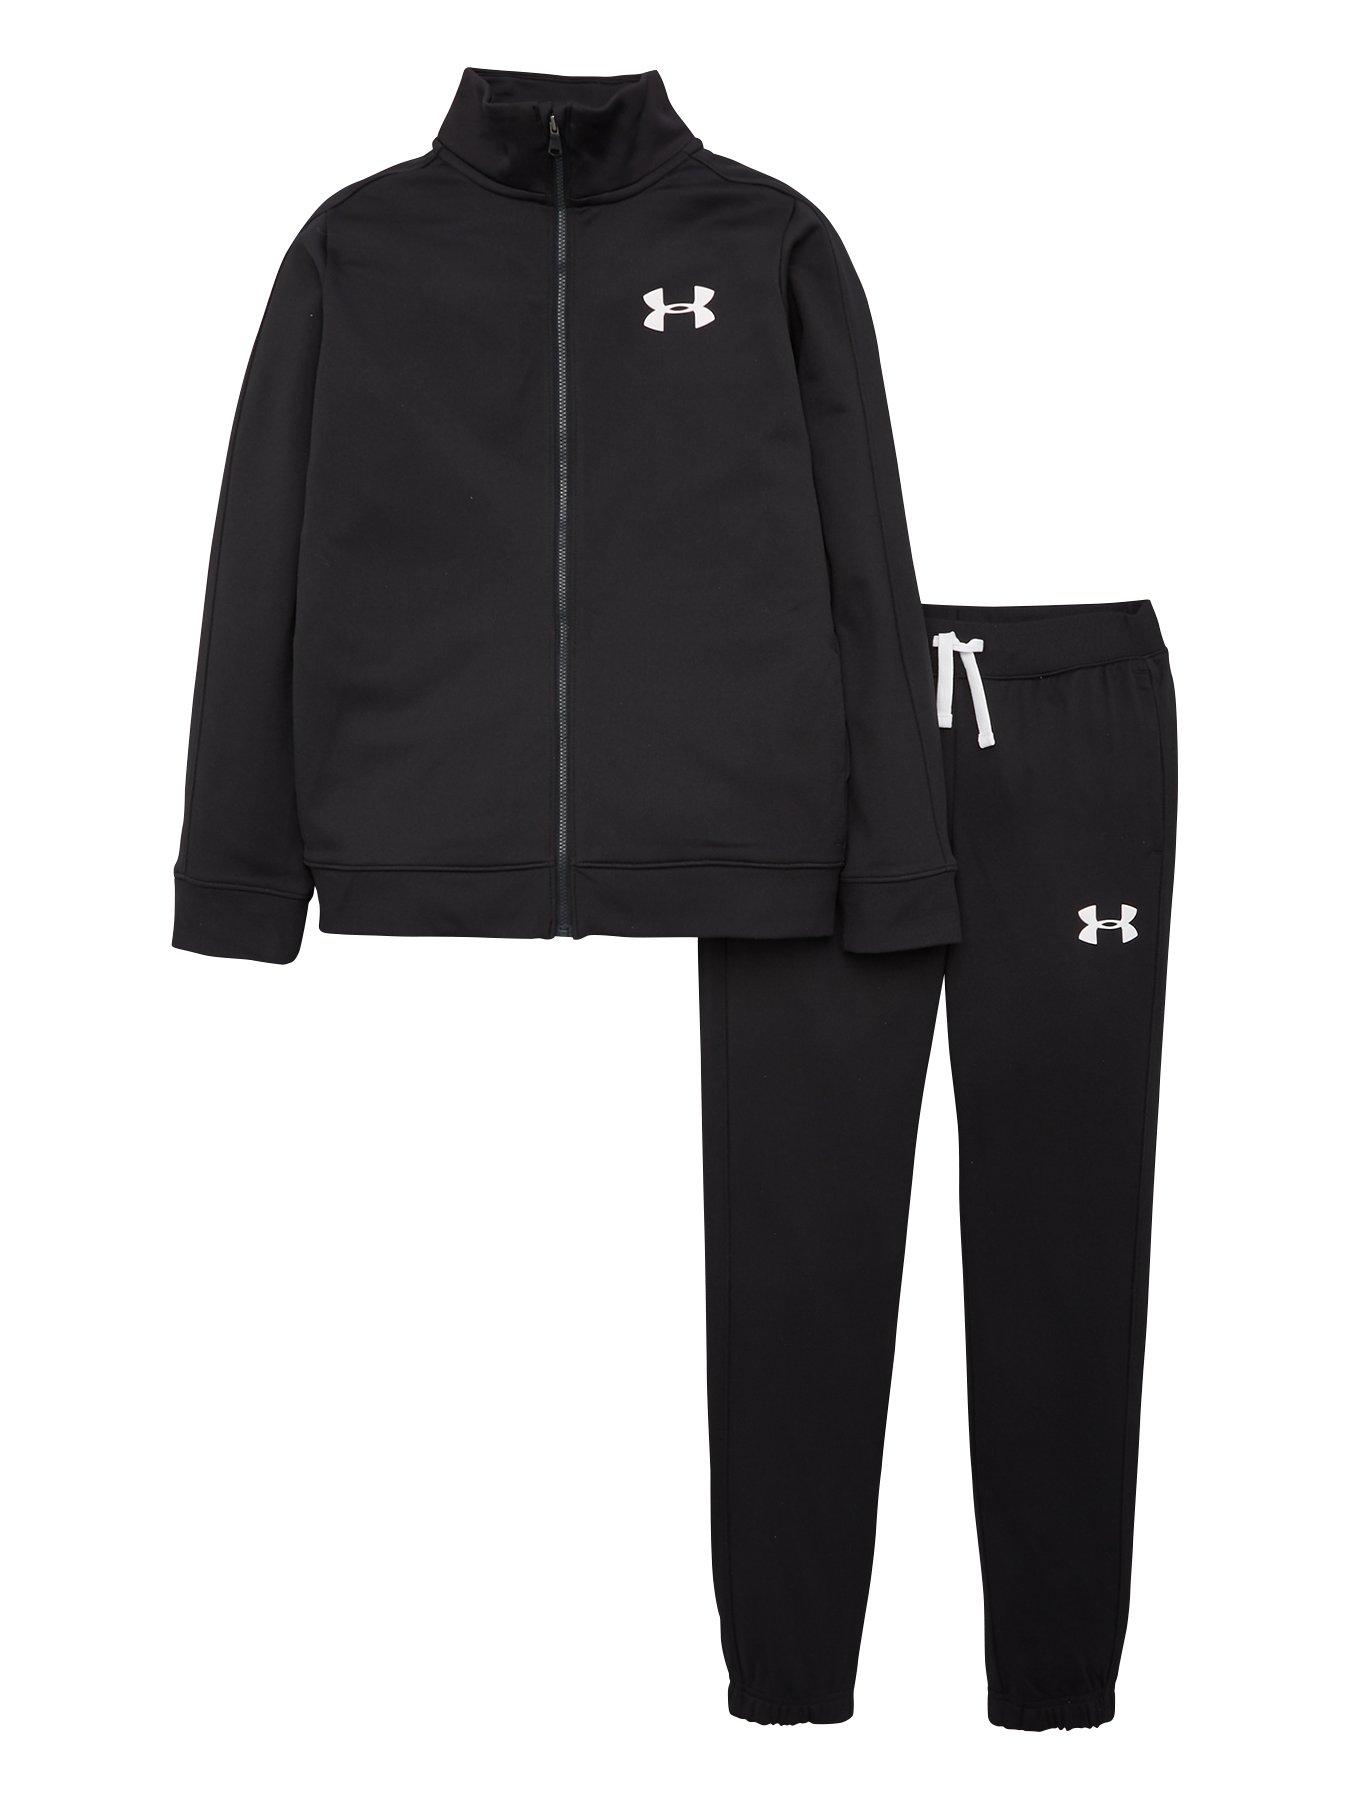 girls tracksuit age 9